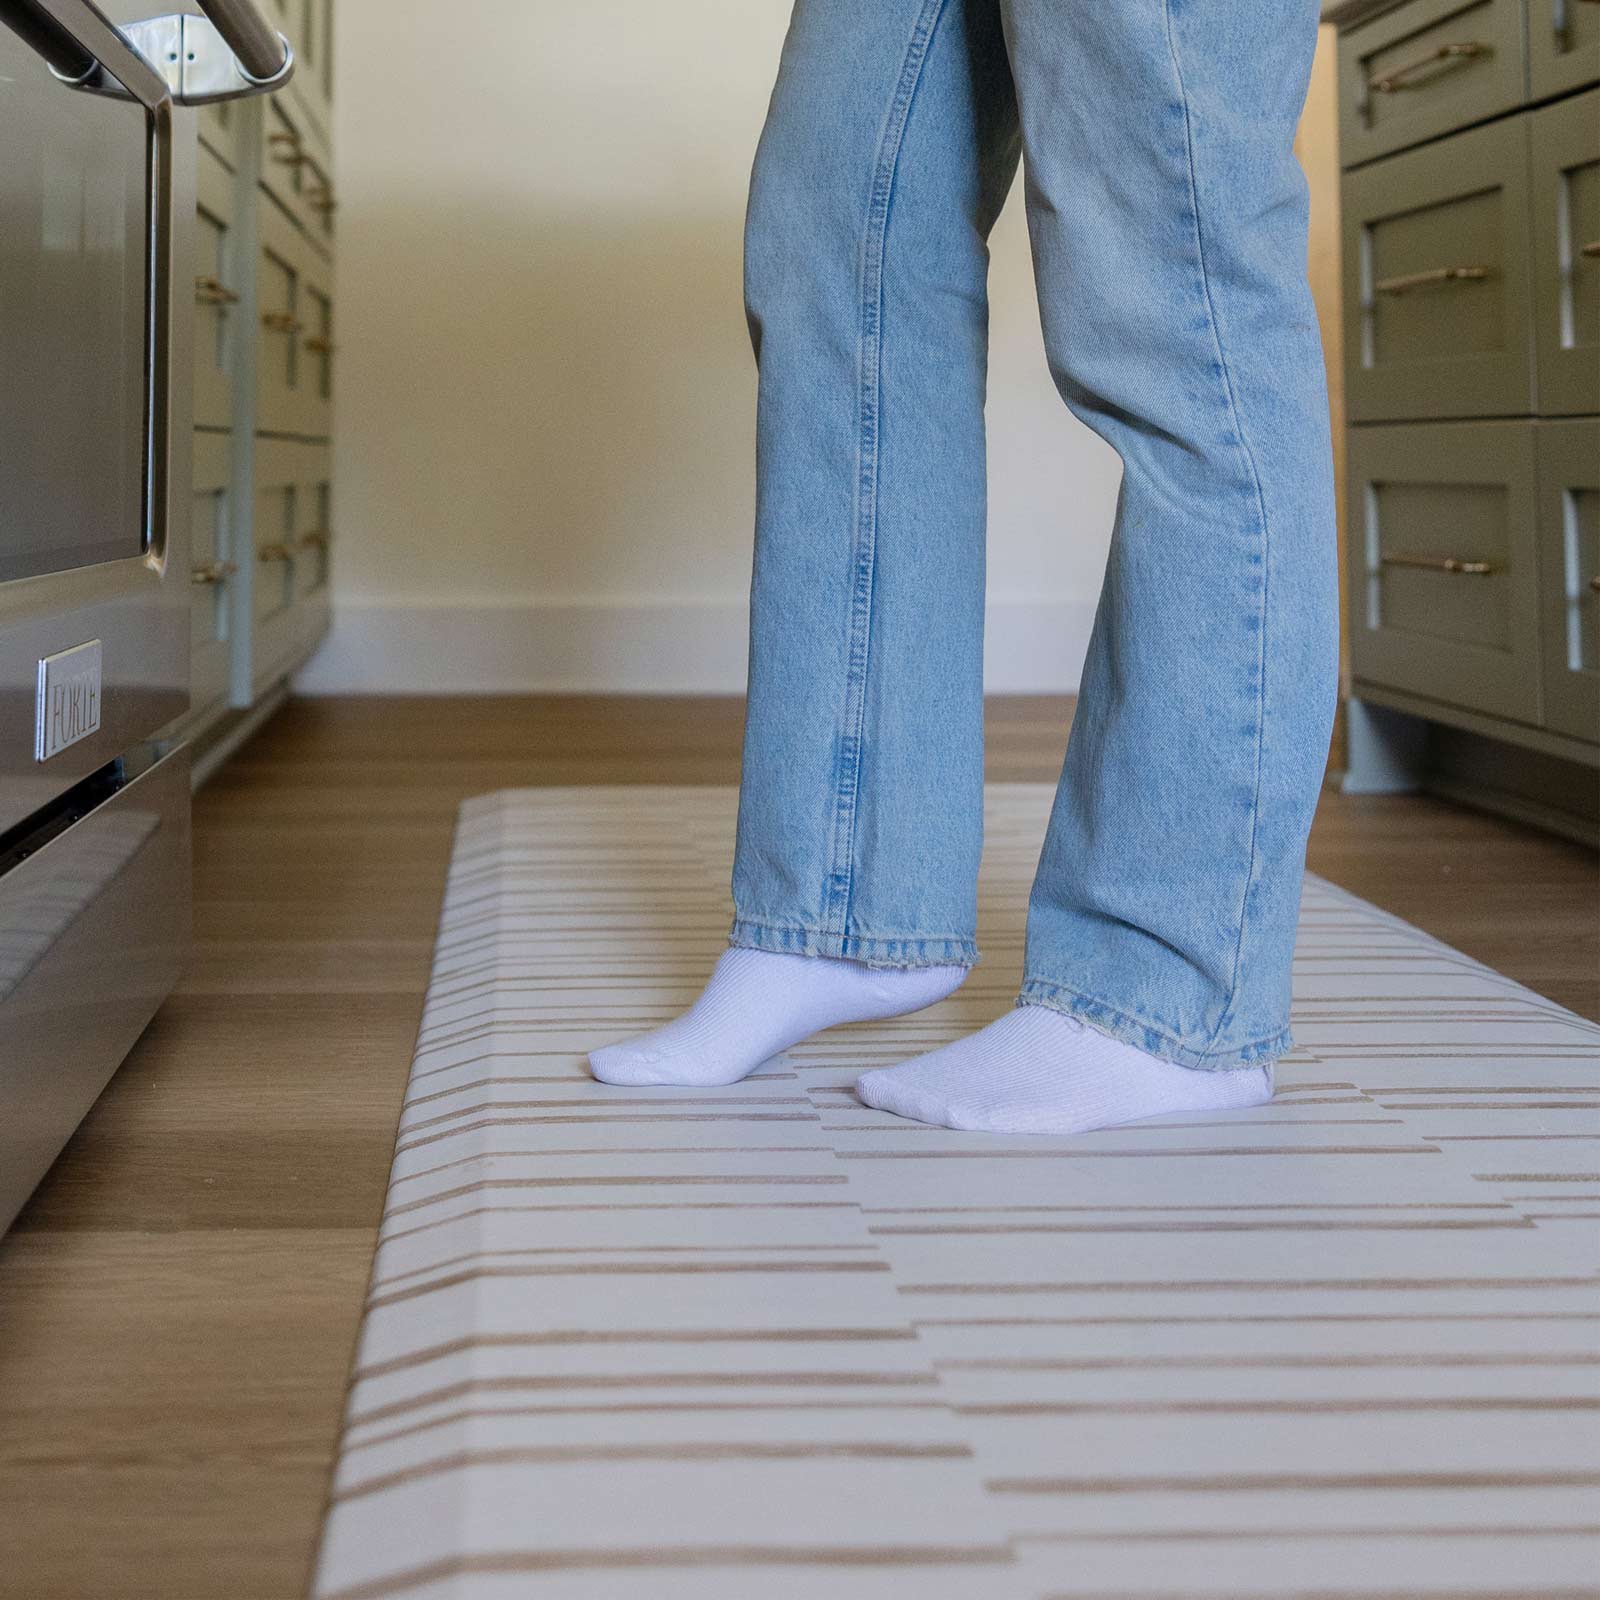 Nara natural beige and cream inverted stripe standing mat shown in kitchen with womans feet standing on the mat in front of stove. Shown in size 22x72